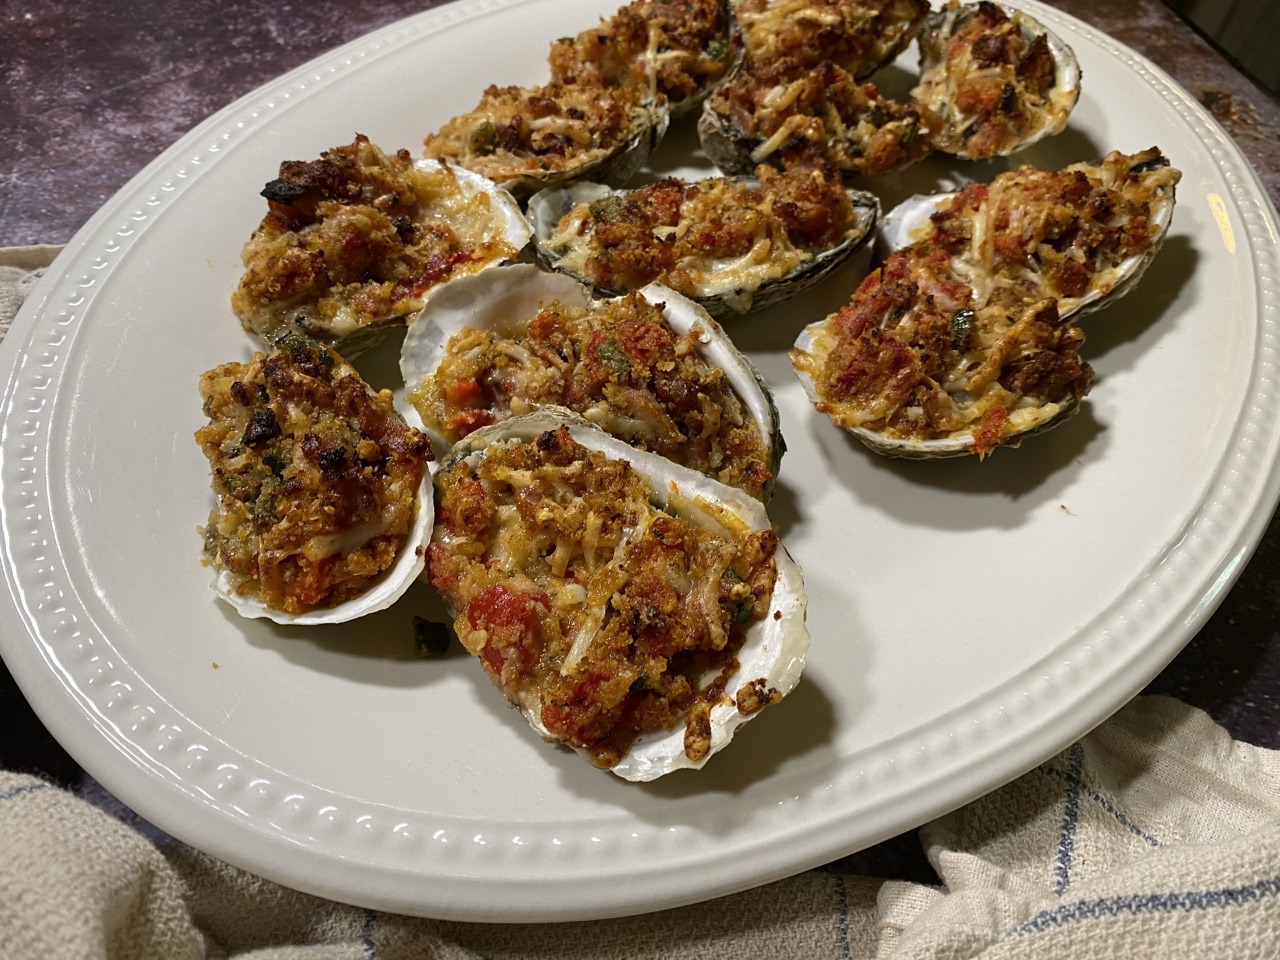 104878B0 453E 485D 9C45 0884D40D9EFB - Sorry Charlie’s Copycat Casino Baked Oysters with Savory Macaroni & Cheese